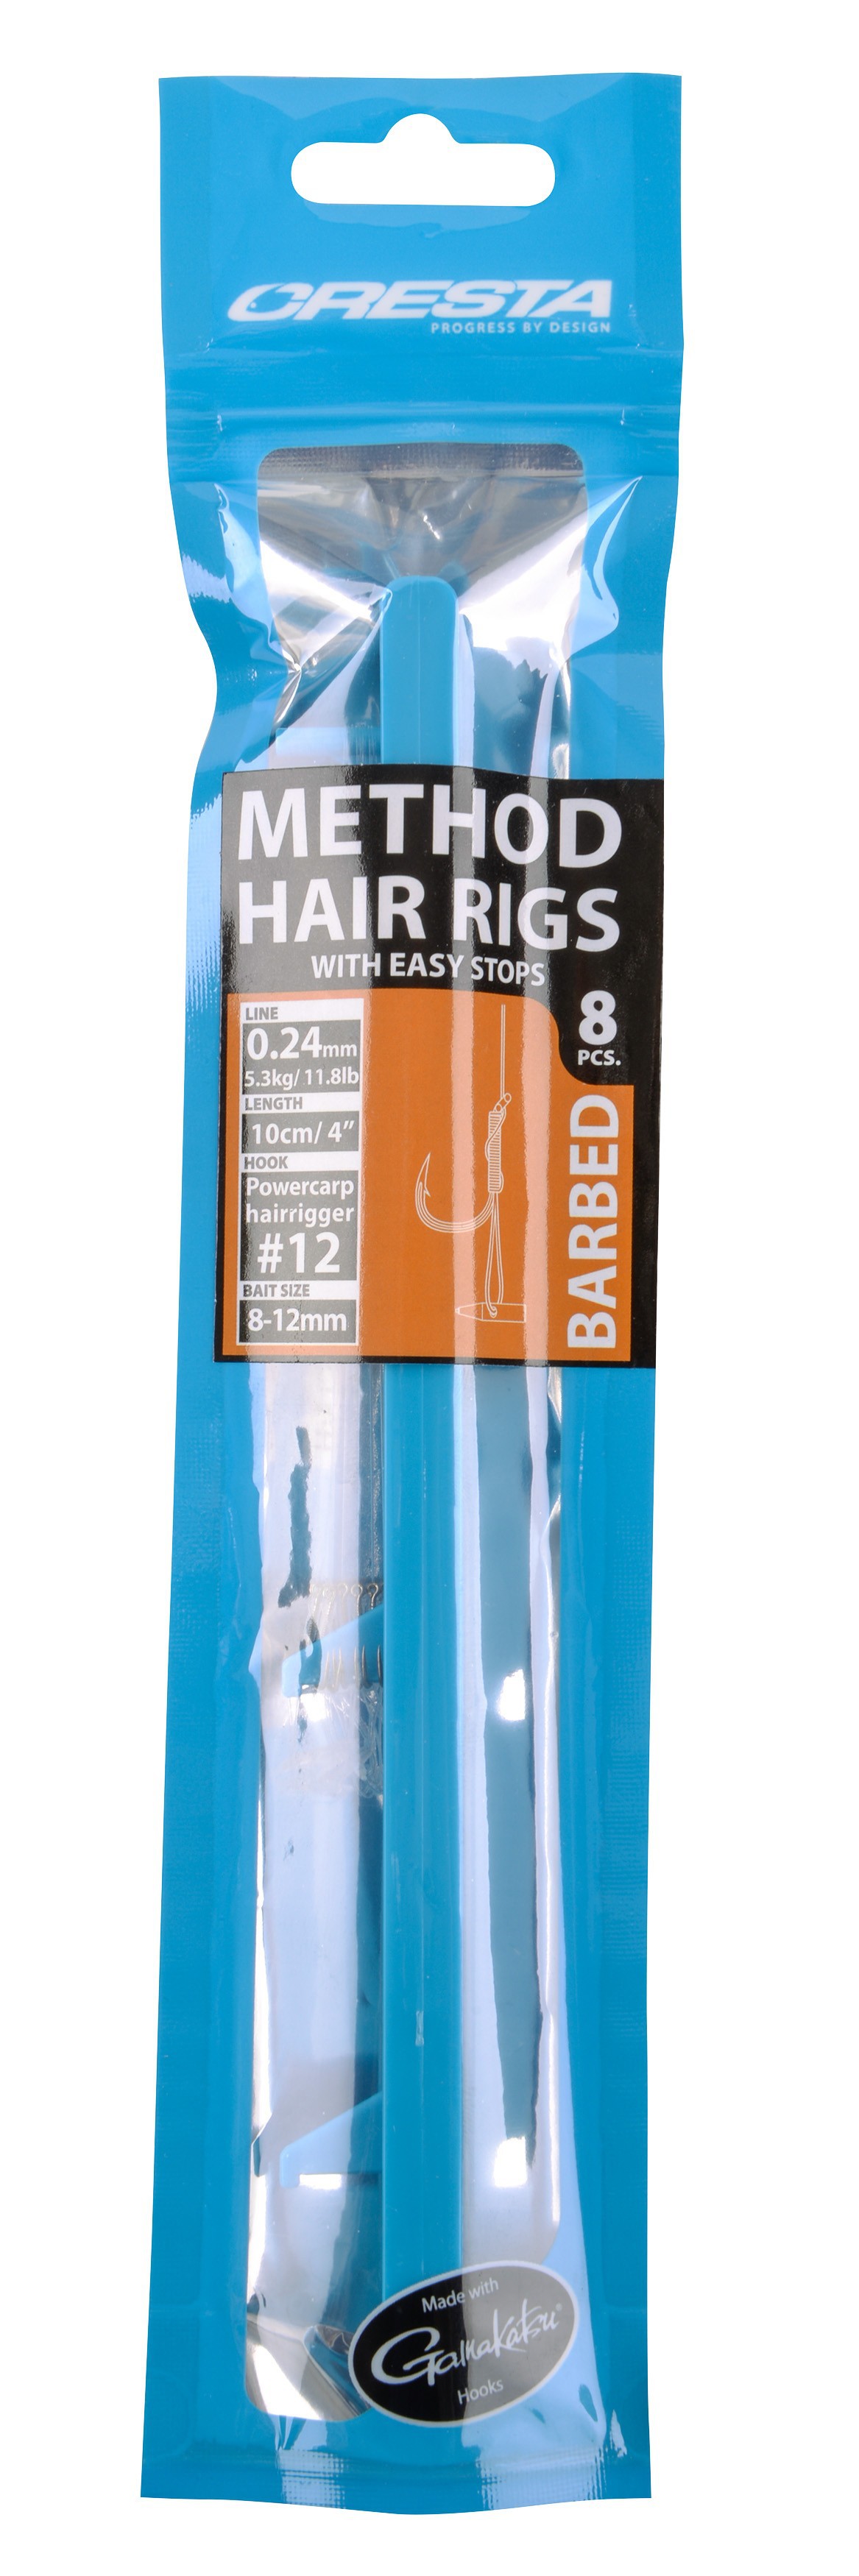 Spro - Cresta Method Hair Rigs With Easy Stops Barbed 4" – 10 cm Size 12